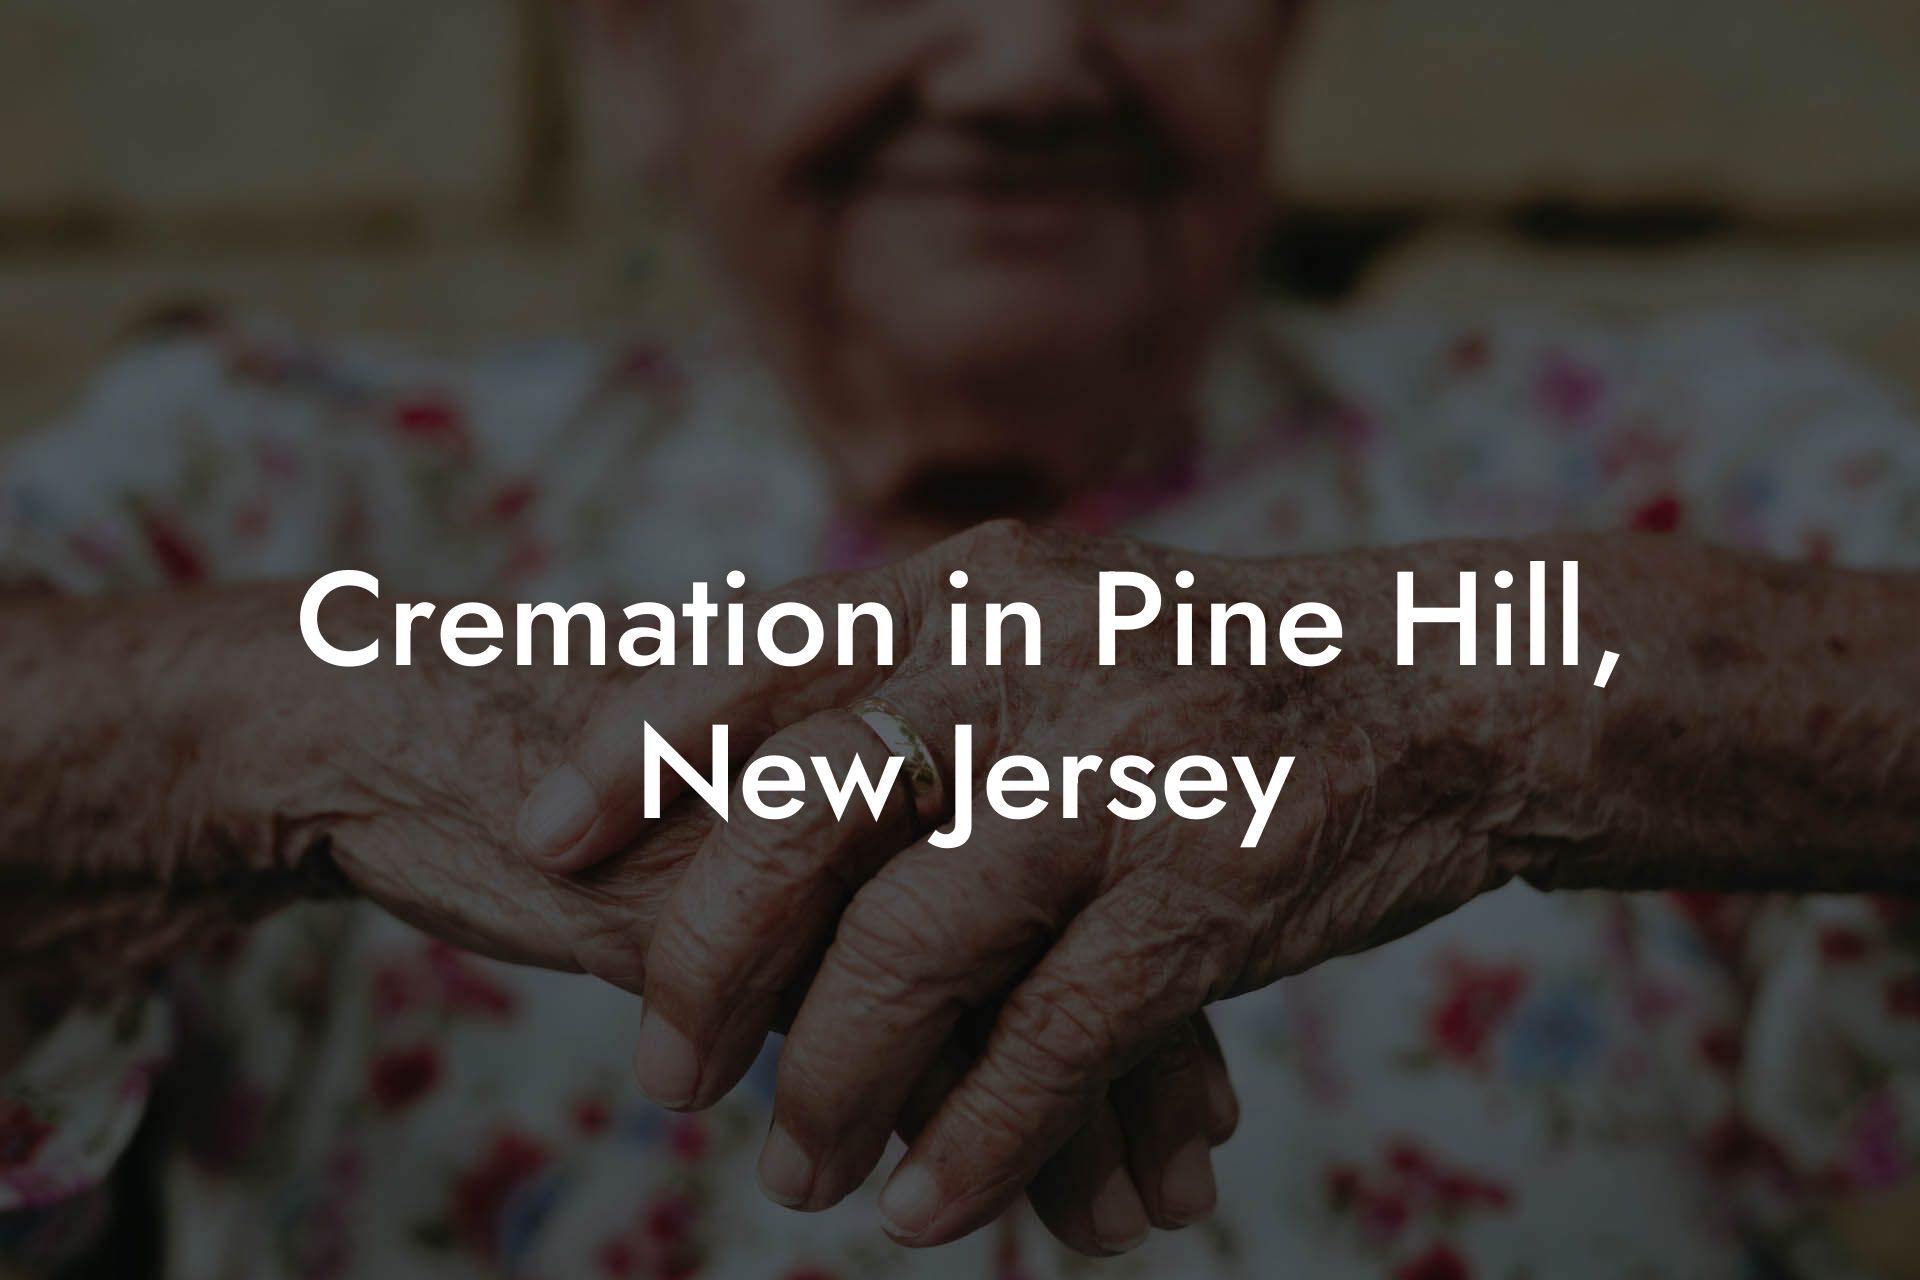 Cremation in Pine Hill, New Jersey